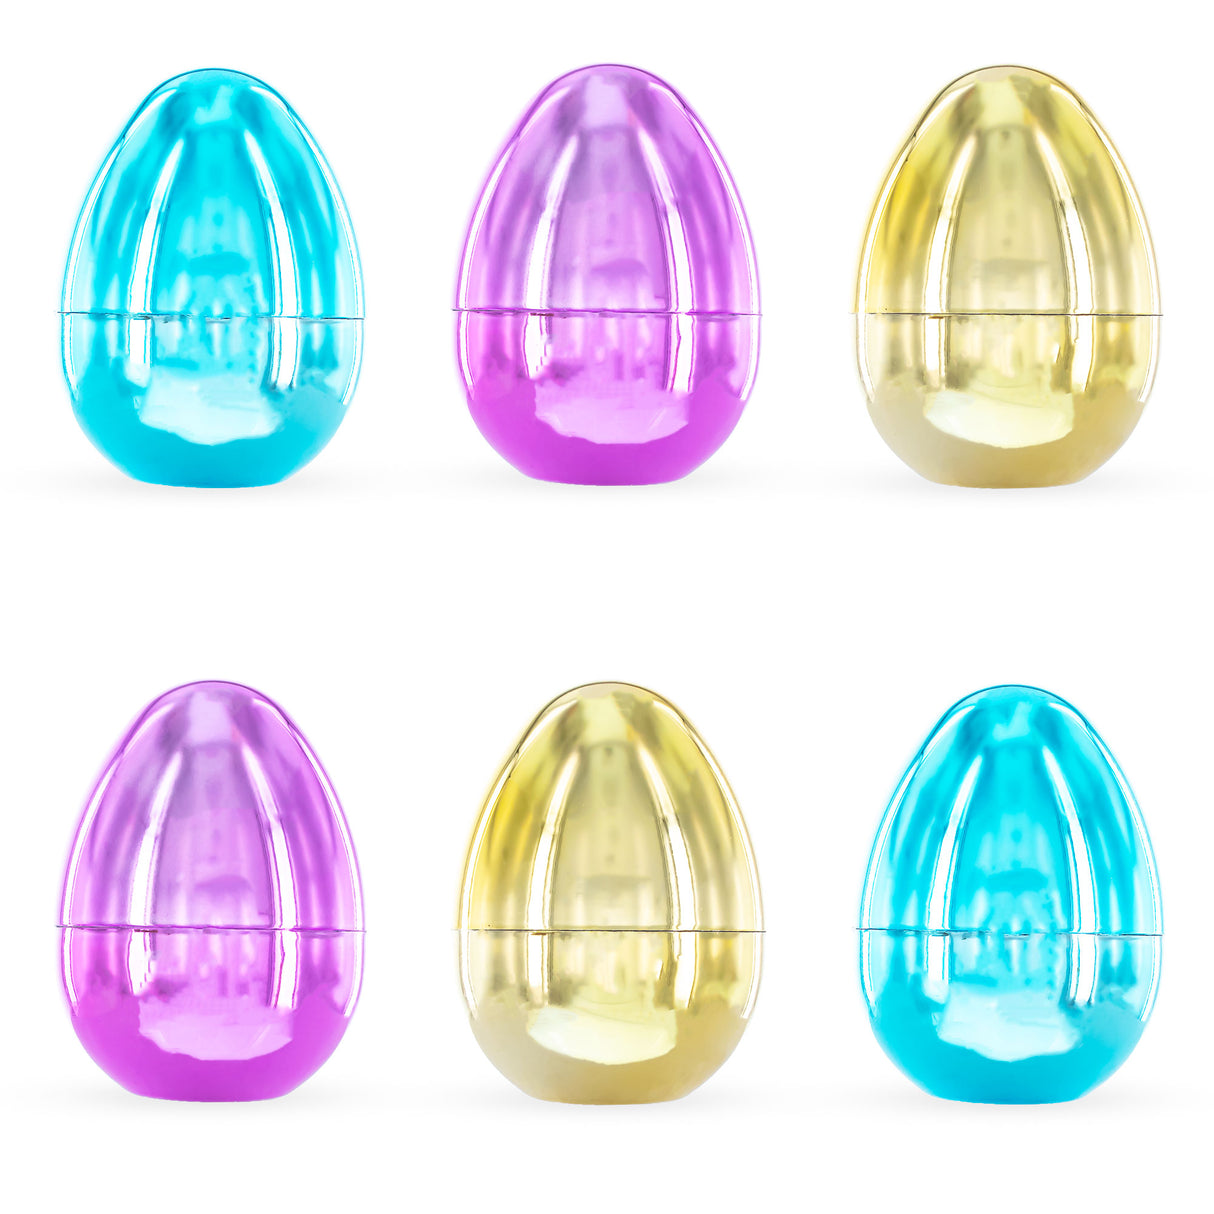 Easter Shine and Surprise: Set of 6 Large Fillable Multicolored Metallic Plastic Easter Eggs 4 Inches in Multi color, Oval shape